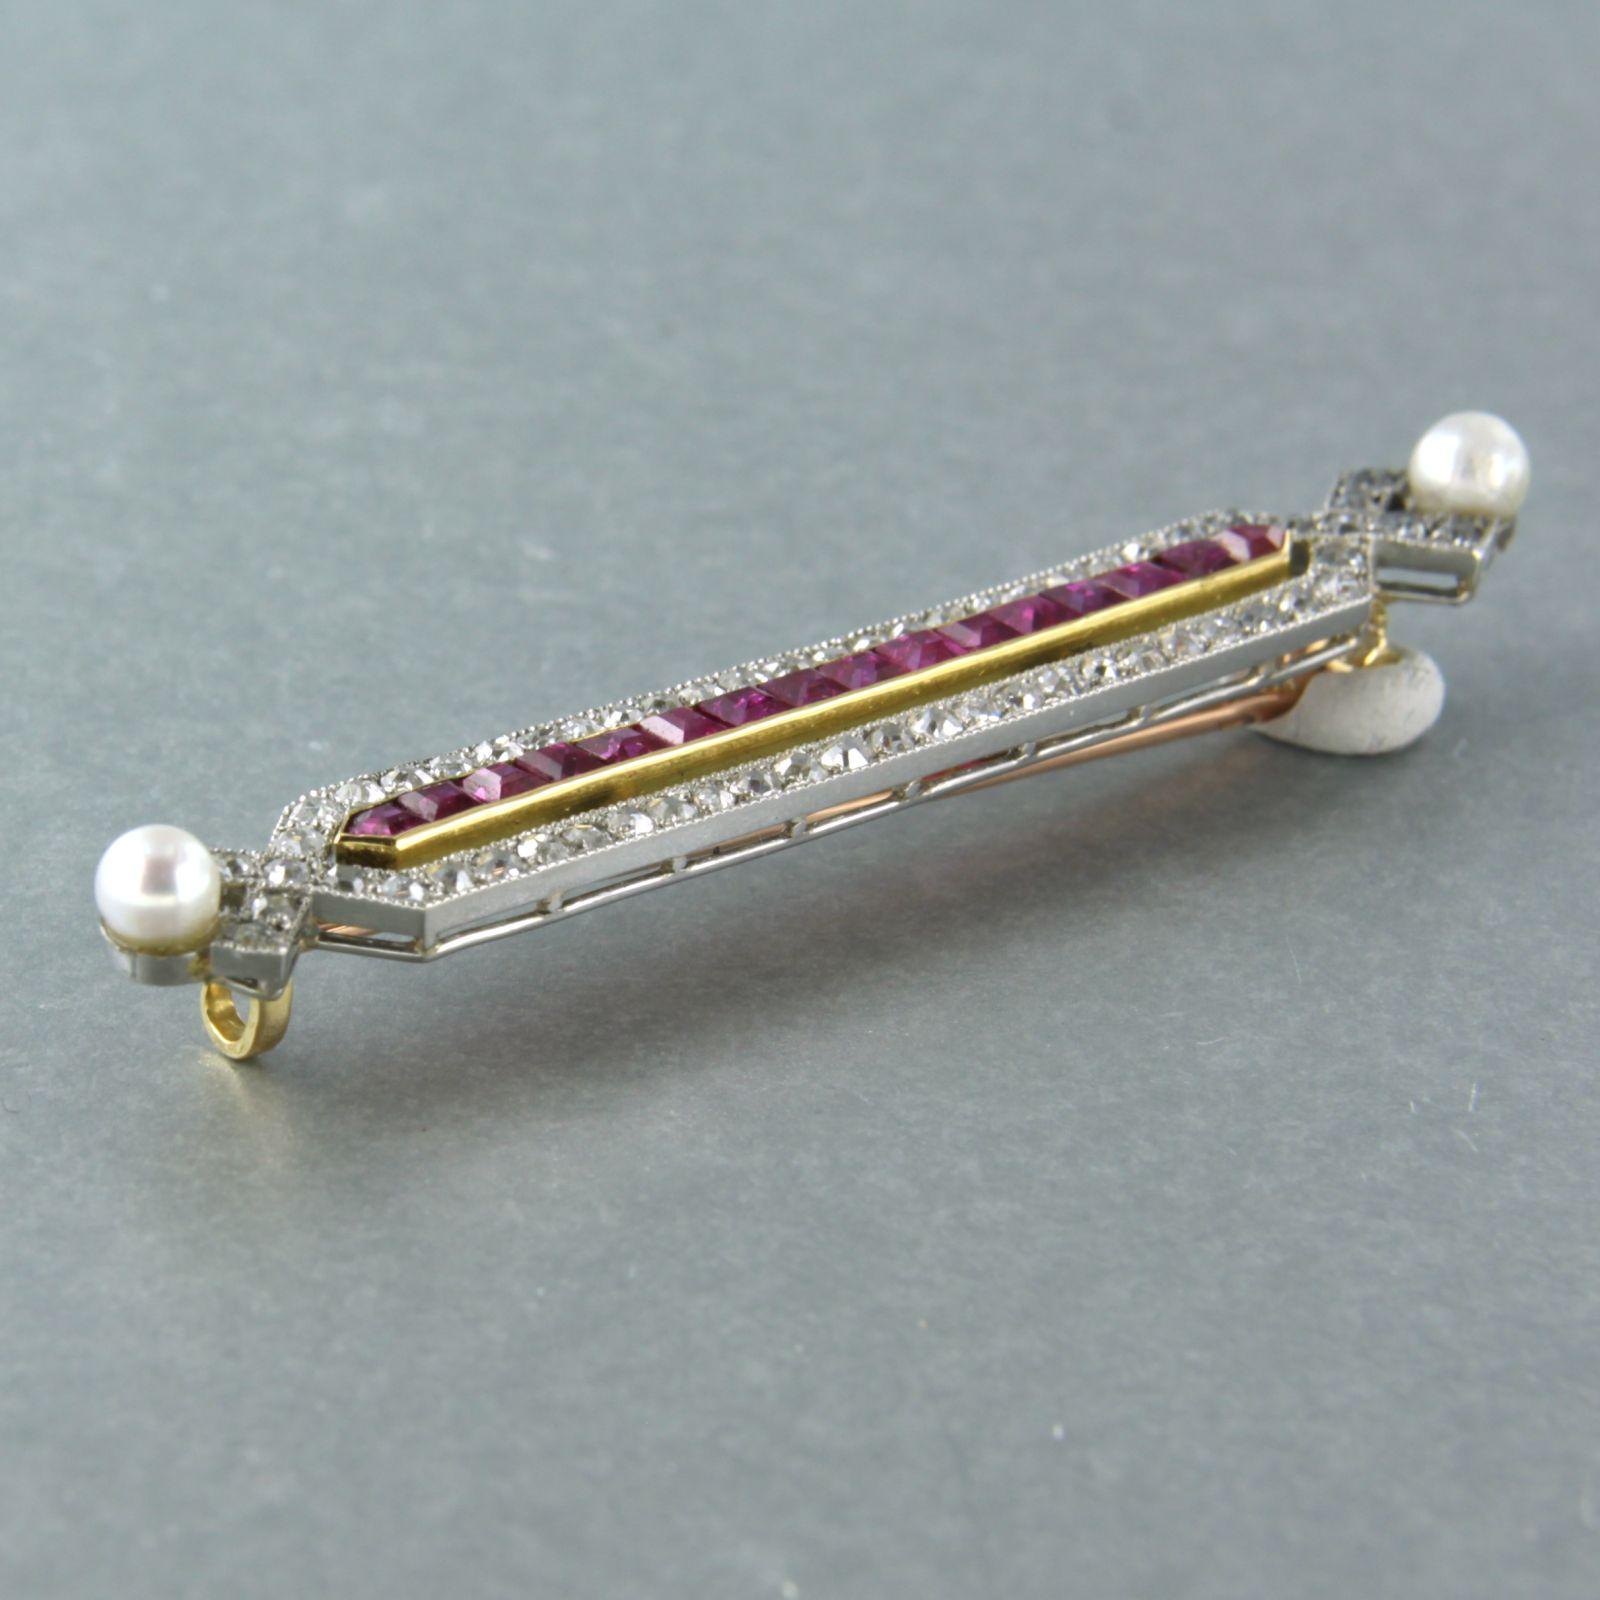 18k gold with platina brooch set with pearl, ruby ​​and old mine cut diamonds. 1.20ct - F/G - SI/P 

detailed description

the size of the brooch is 7.7 mm high by 5.6 cm wide

total weight: 6.3 grams

Set with:

- 2 x 4.0 mm freshwater cultivated